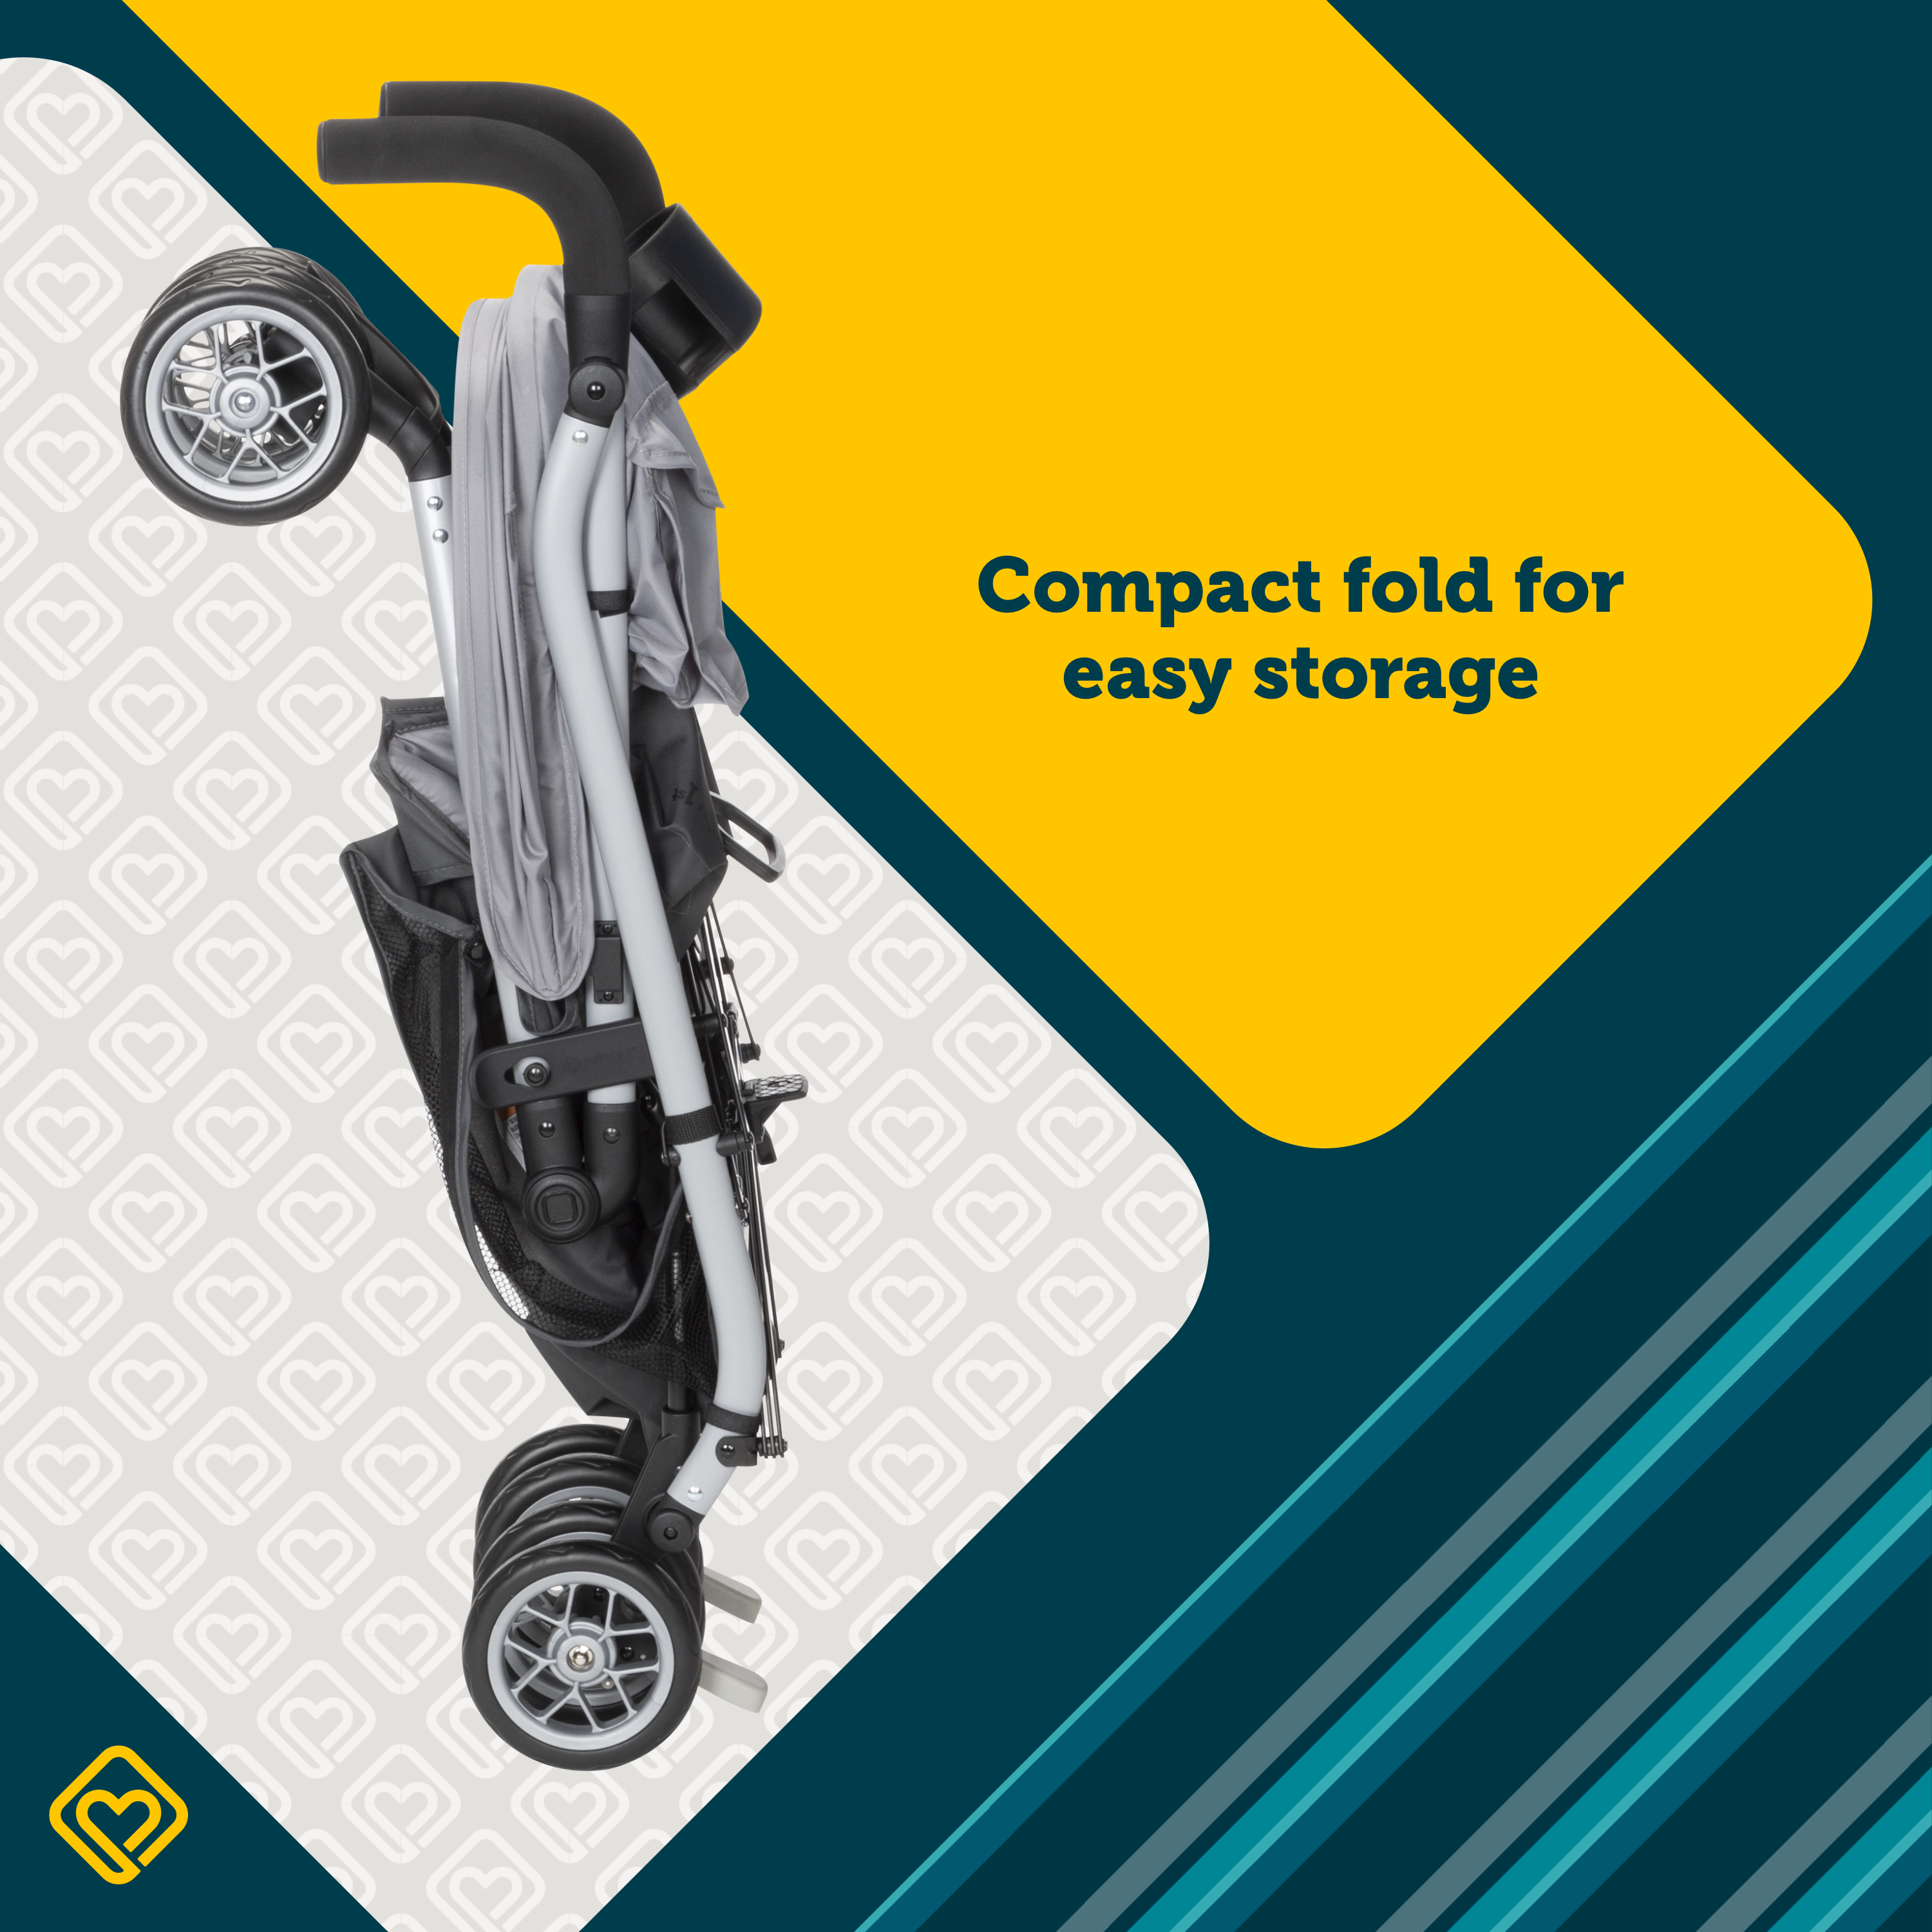 Strollerette Compact Stroller - compact fold for easy storage